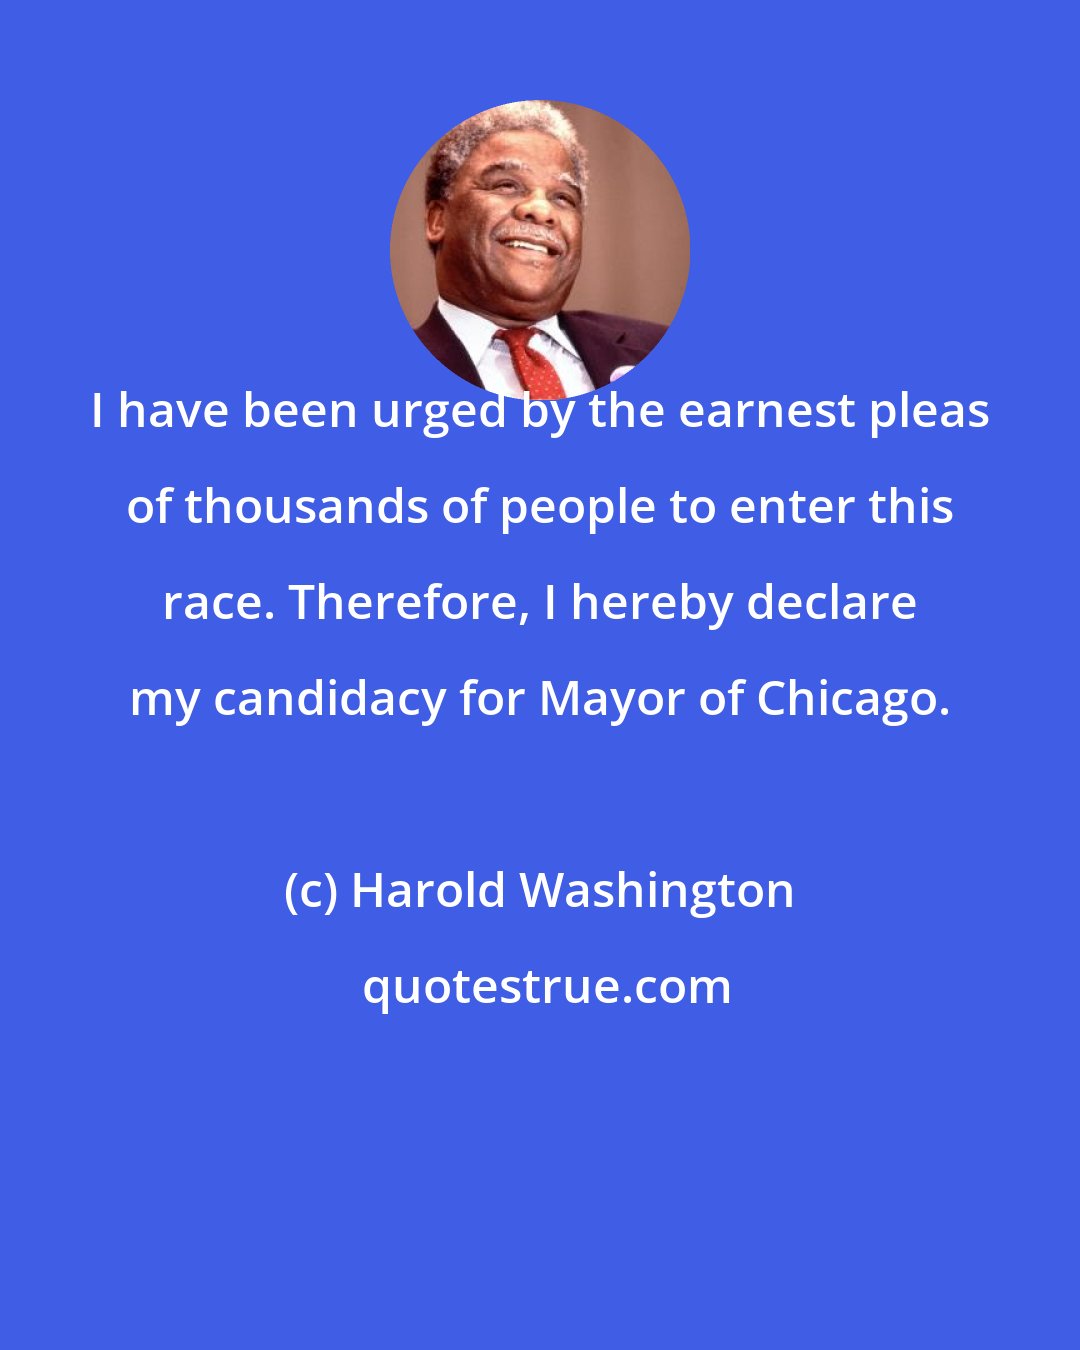 Harold Washington: I have been urged by the earnest pleas of thousands of people to enter this race. Therefore, I hereby declare my candidacy for Mayor of Chicago.